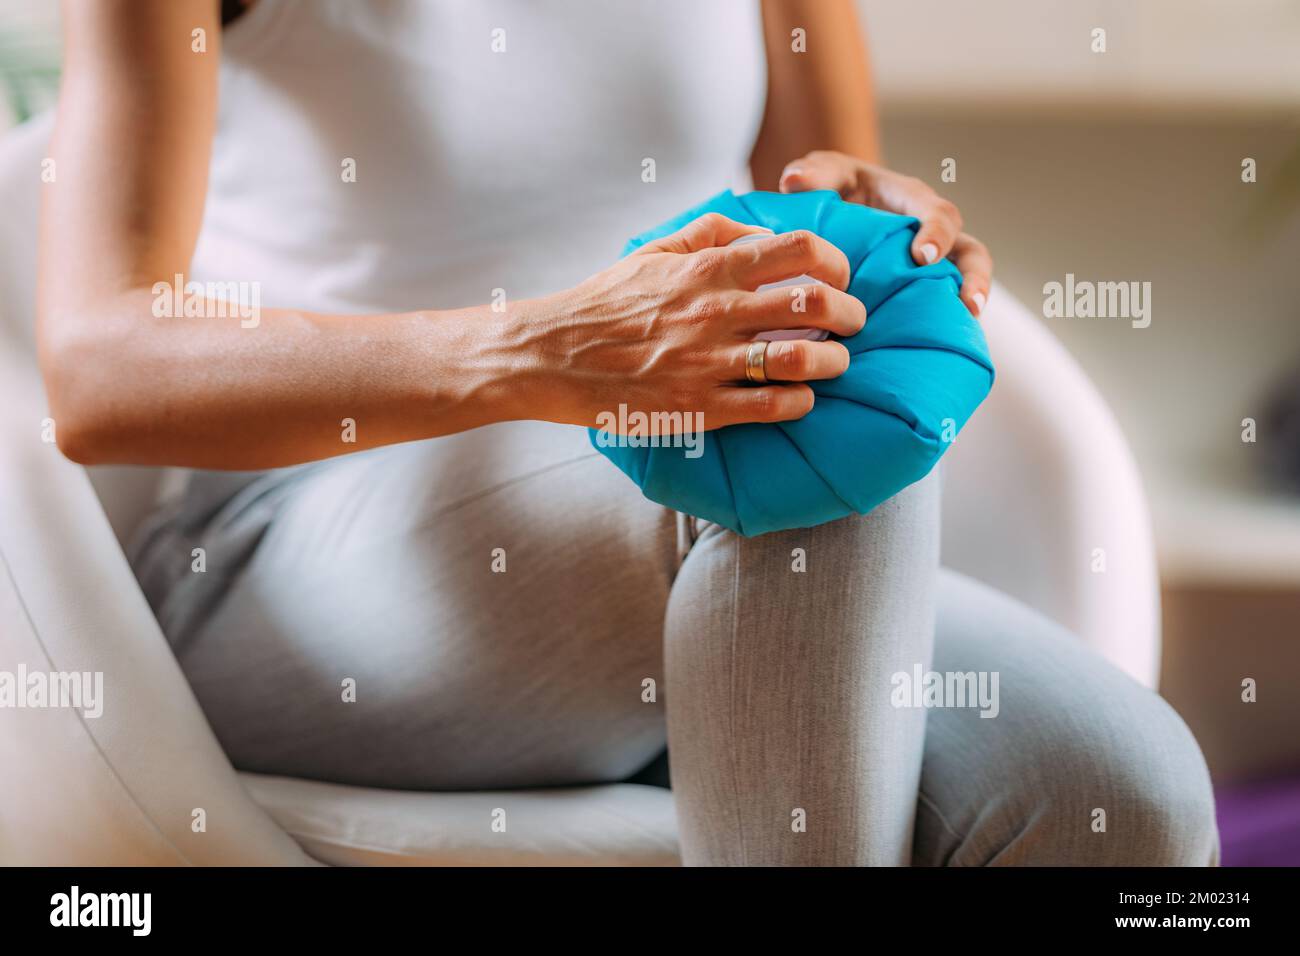 Woman holding a cold compress over her painful knee. Stock Photo